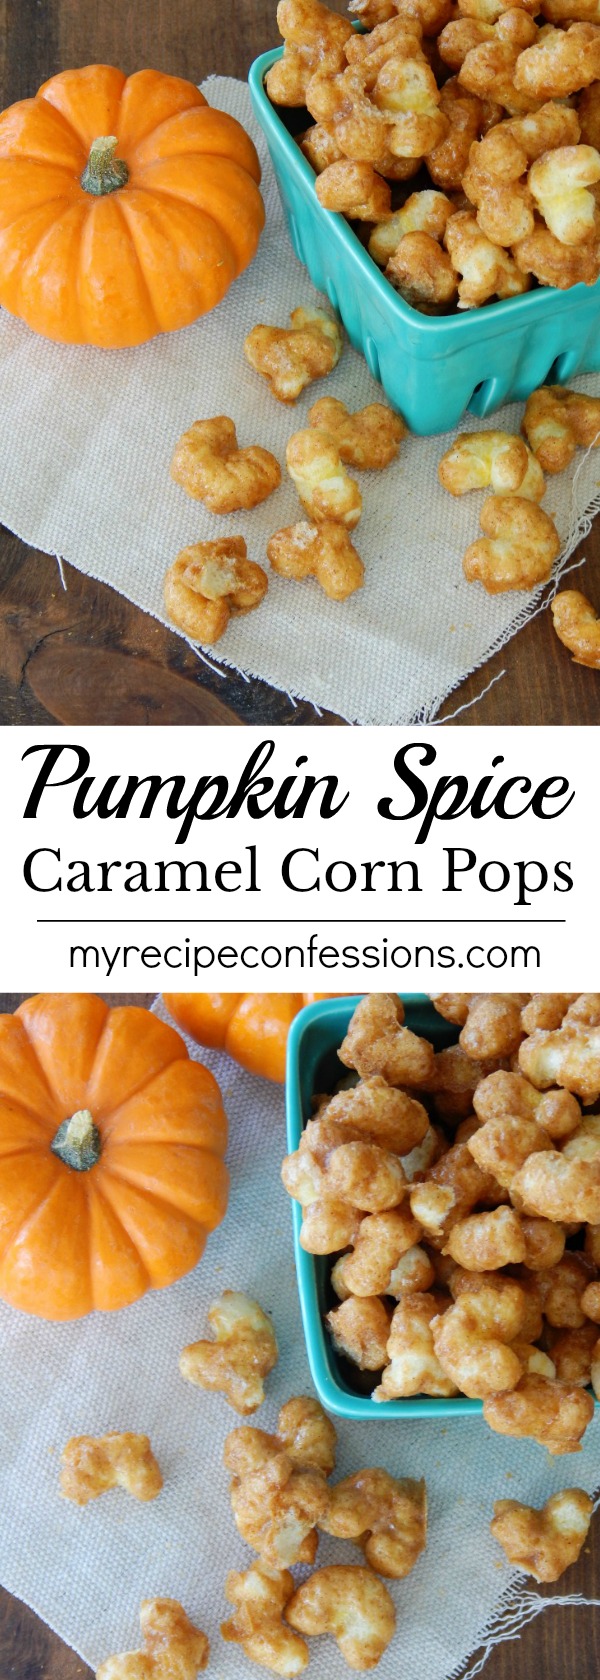 Pumpkin Spice Caramel Corn Pops-Sweet, crunchy, and perfectly spiced. This recipe is super easy and is perfect for movie night, parties, or anytime you want a yummy treat.